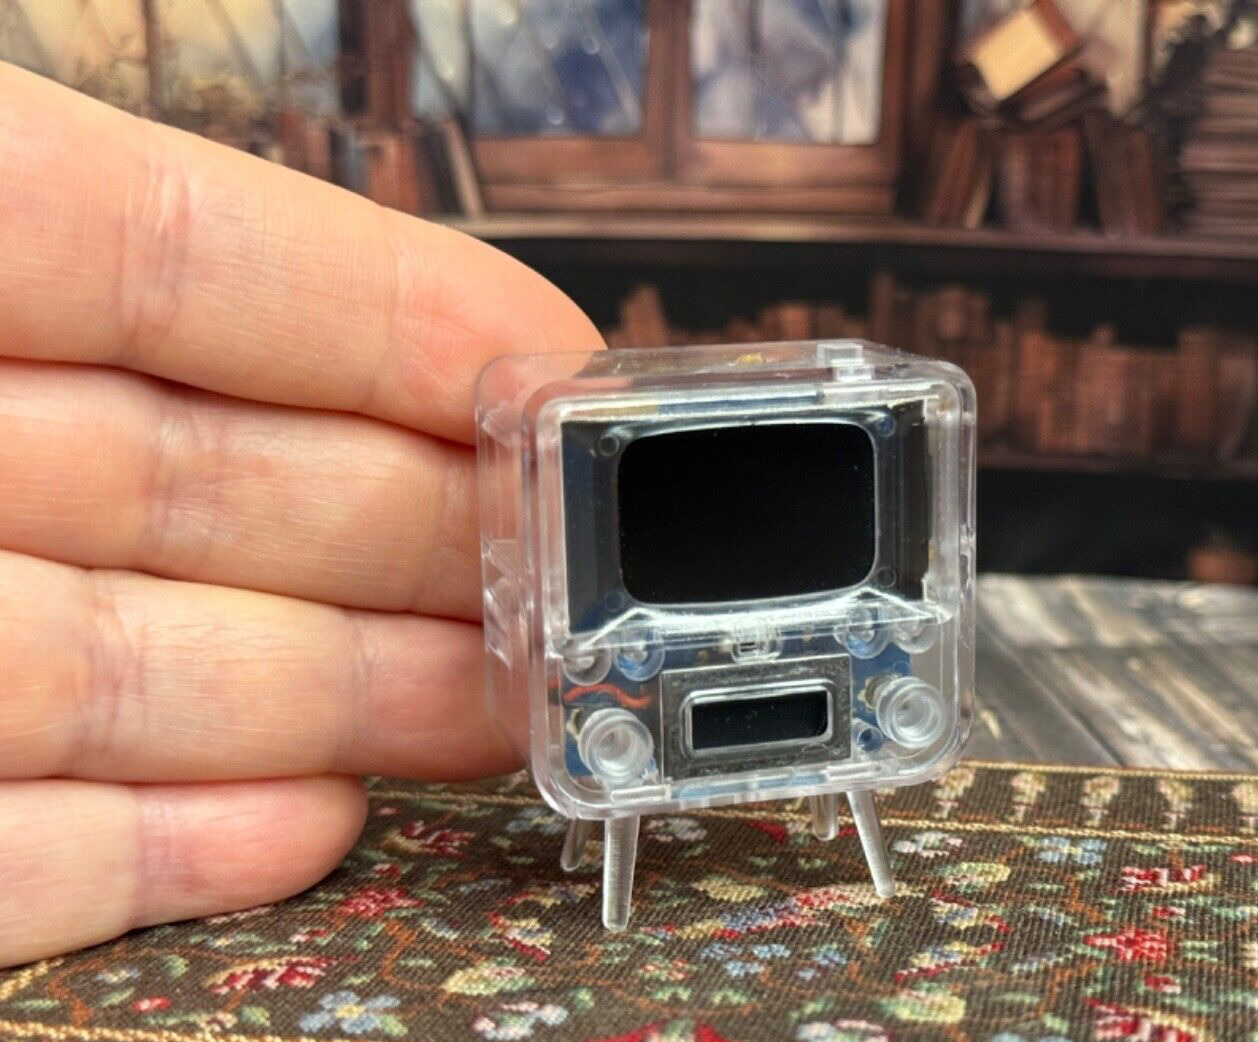 RESERVED ANNAMAEM  1:12 REAL WORKING Mini Television Holds 11 hours Videos